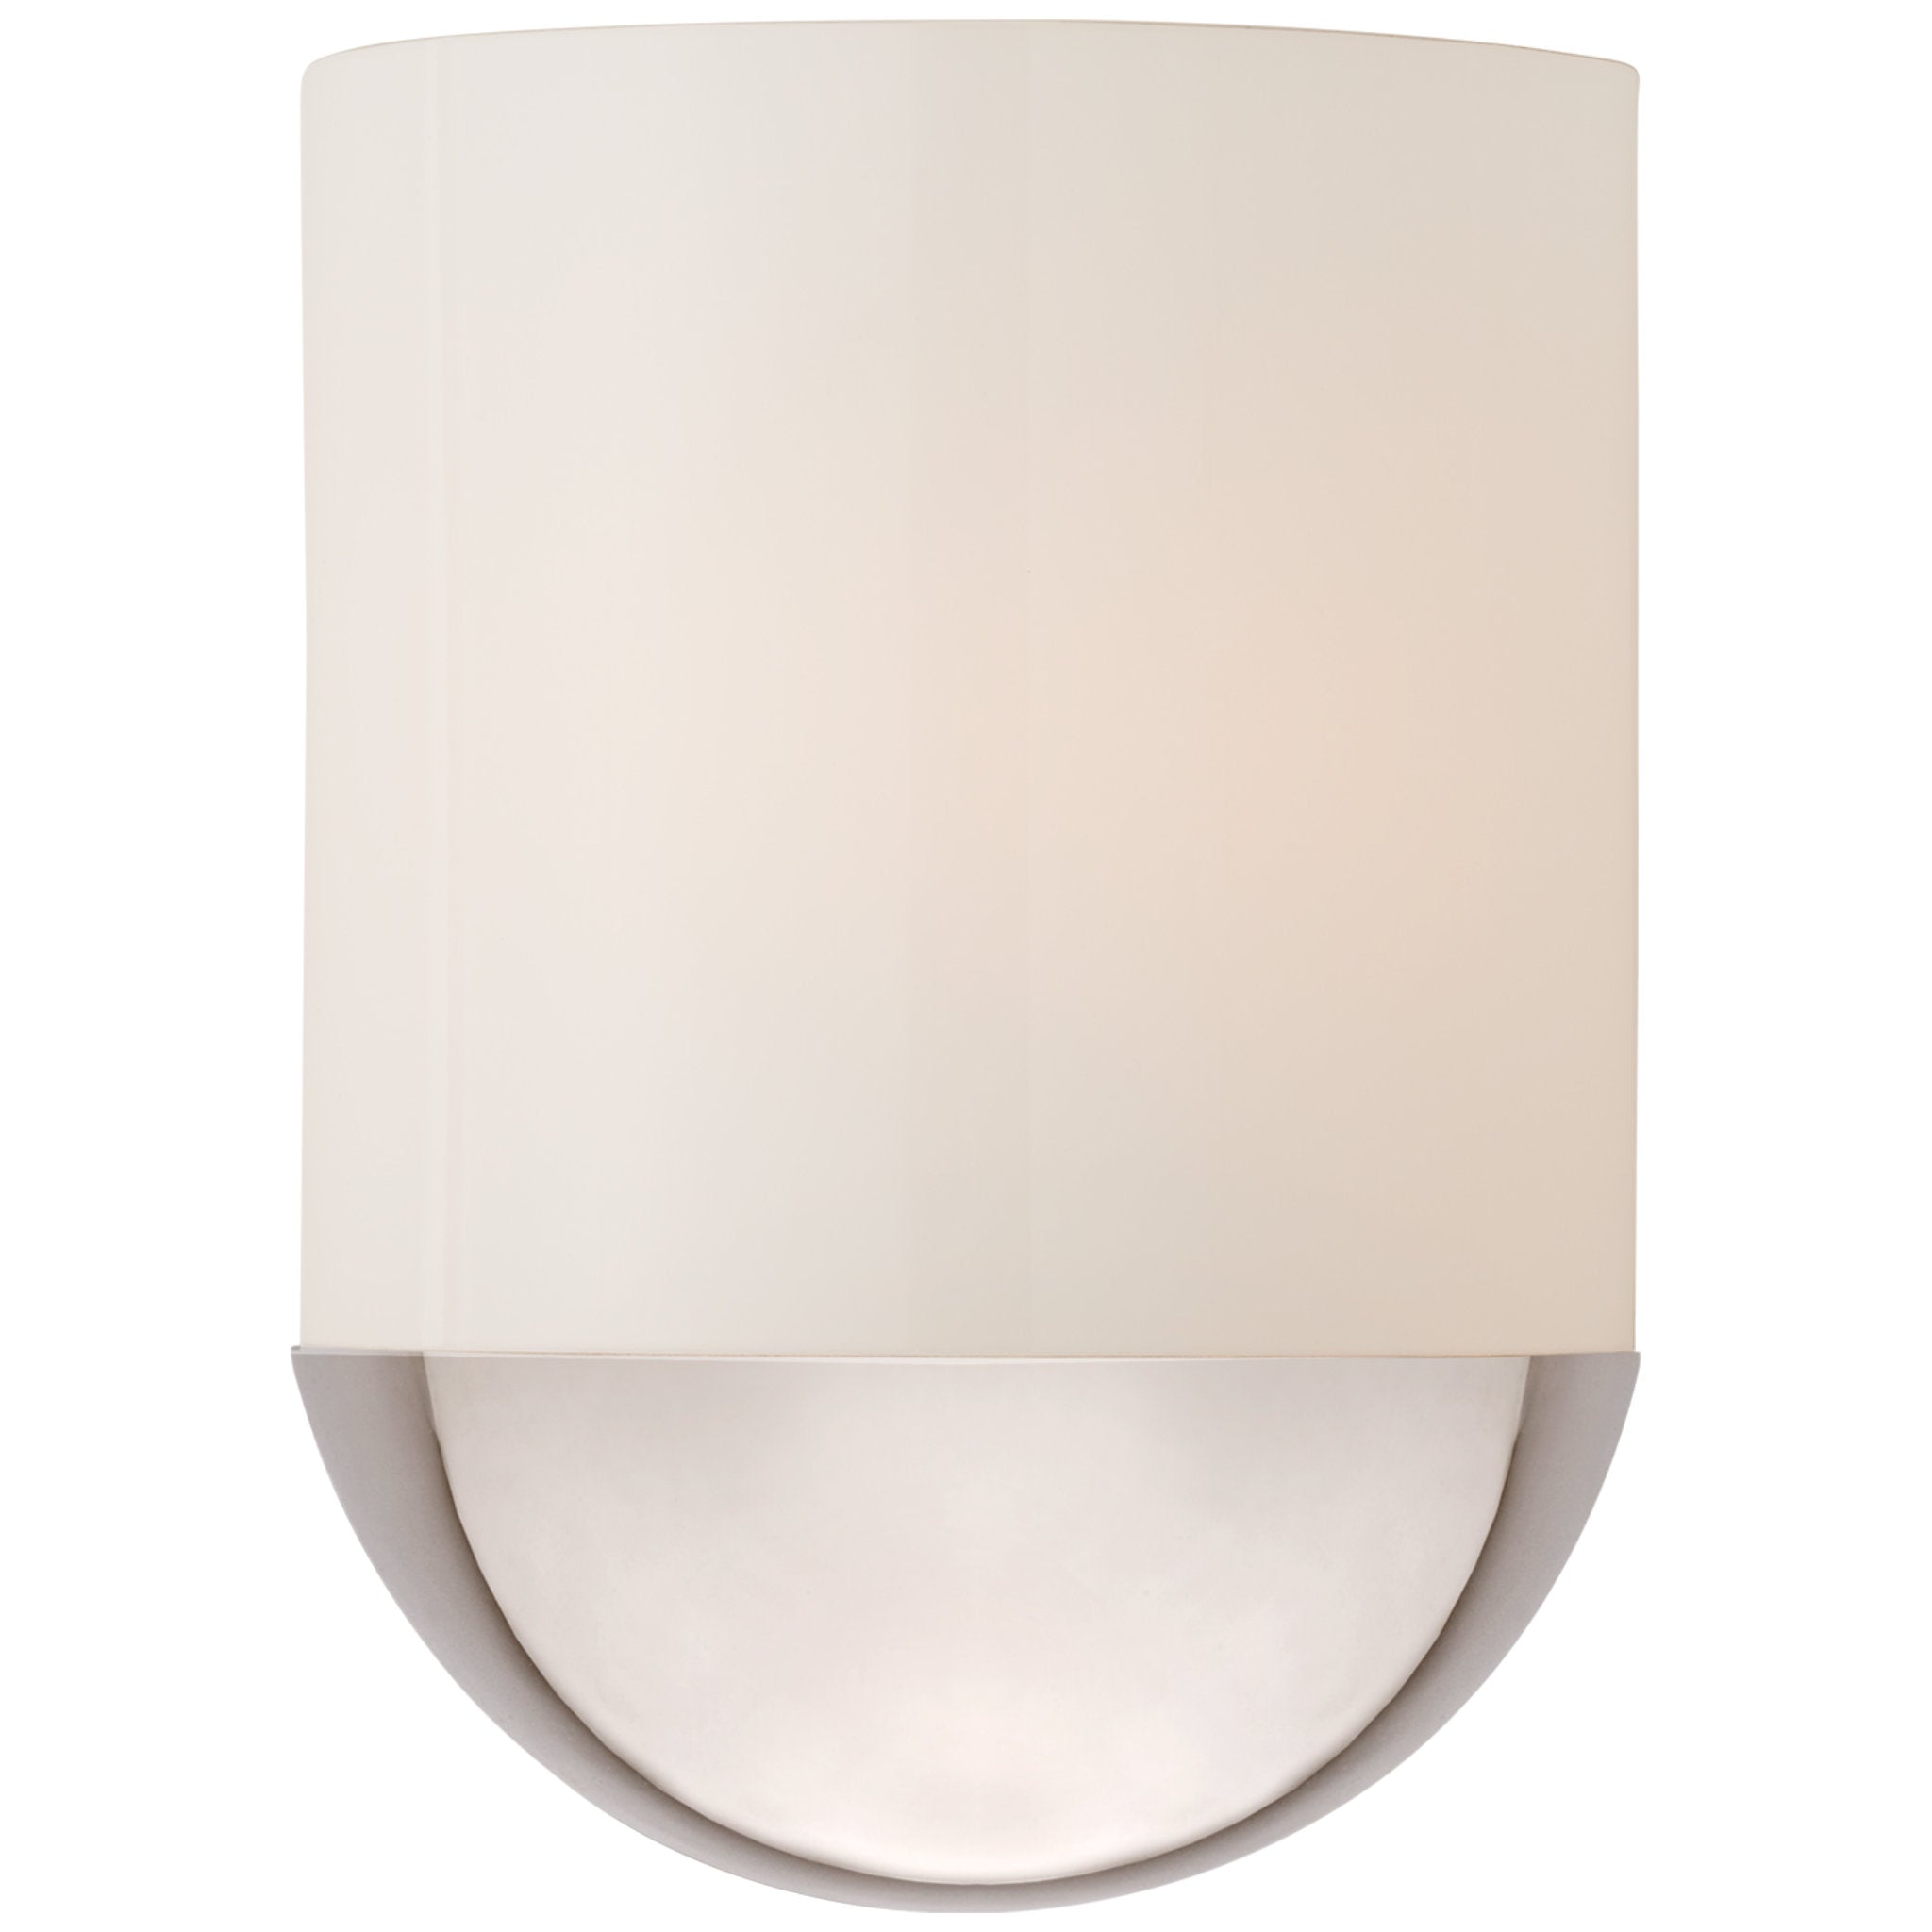 Barbara Barry Crescent Small Sconce in Polished Nickel with White Glass